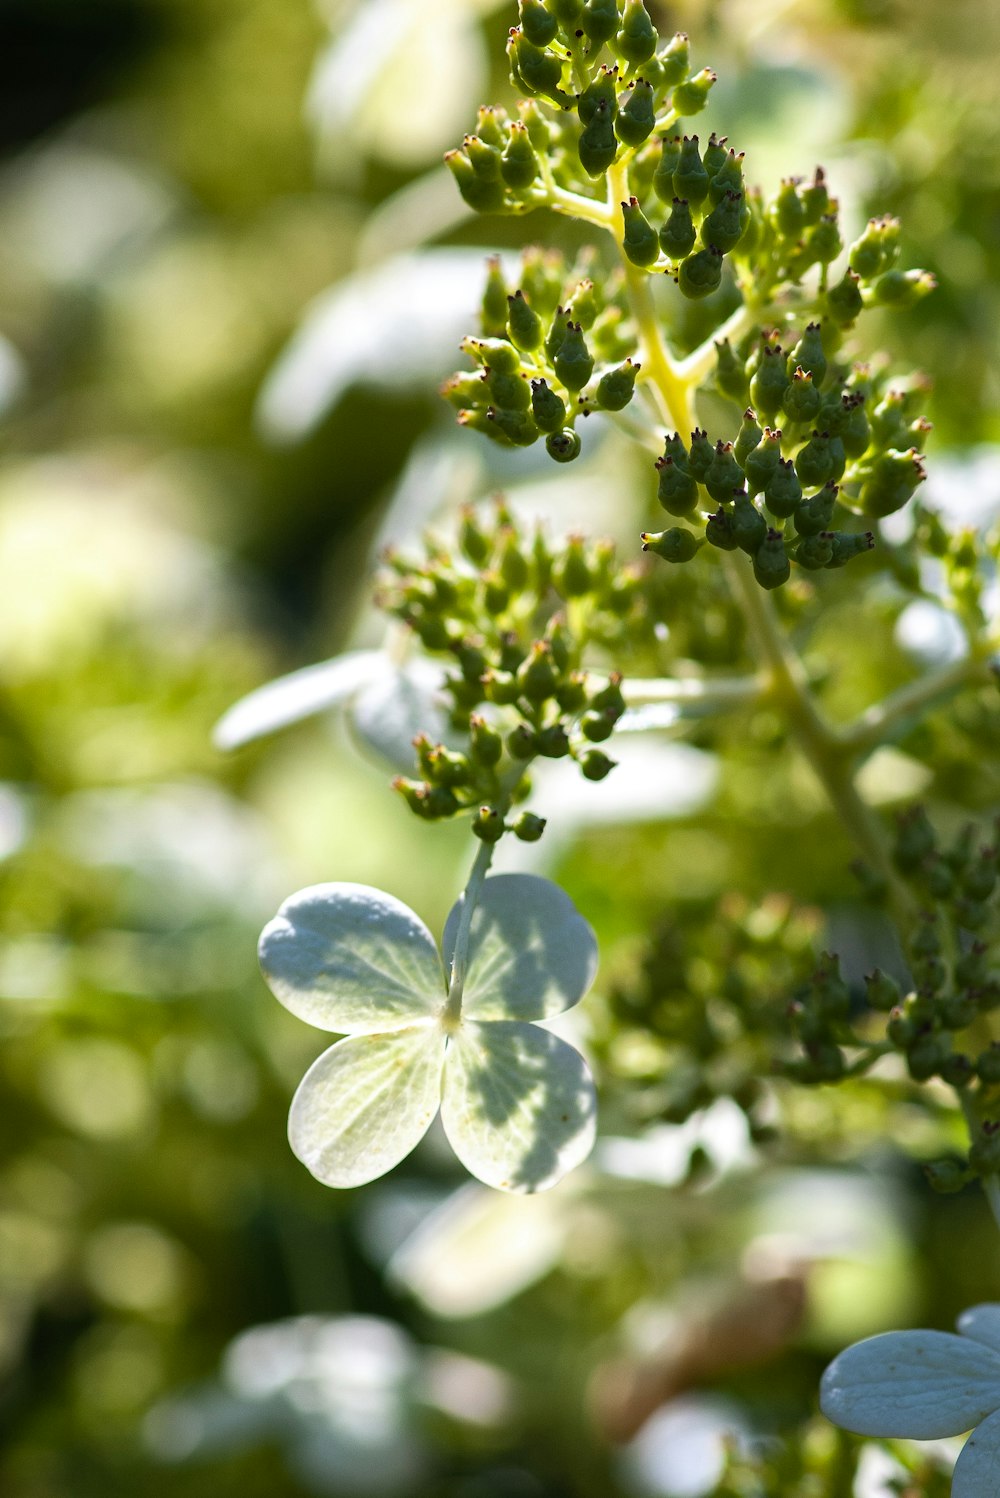 selected focus of green flower buds